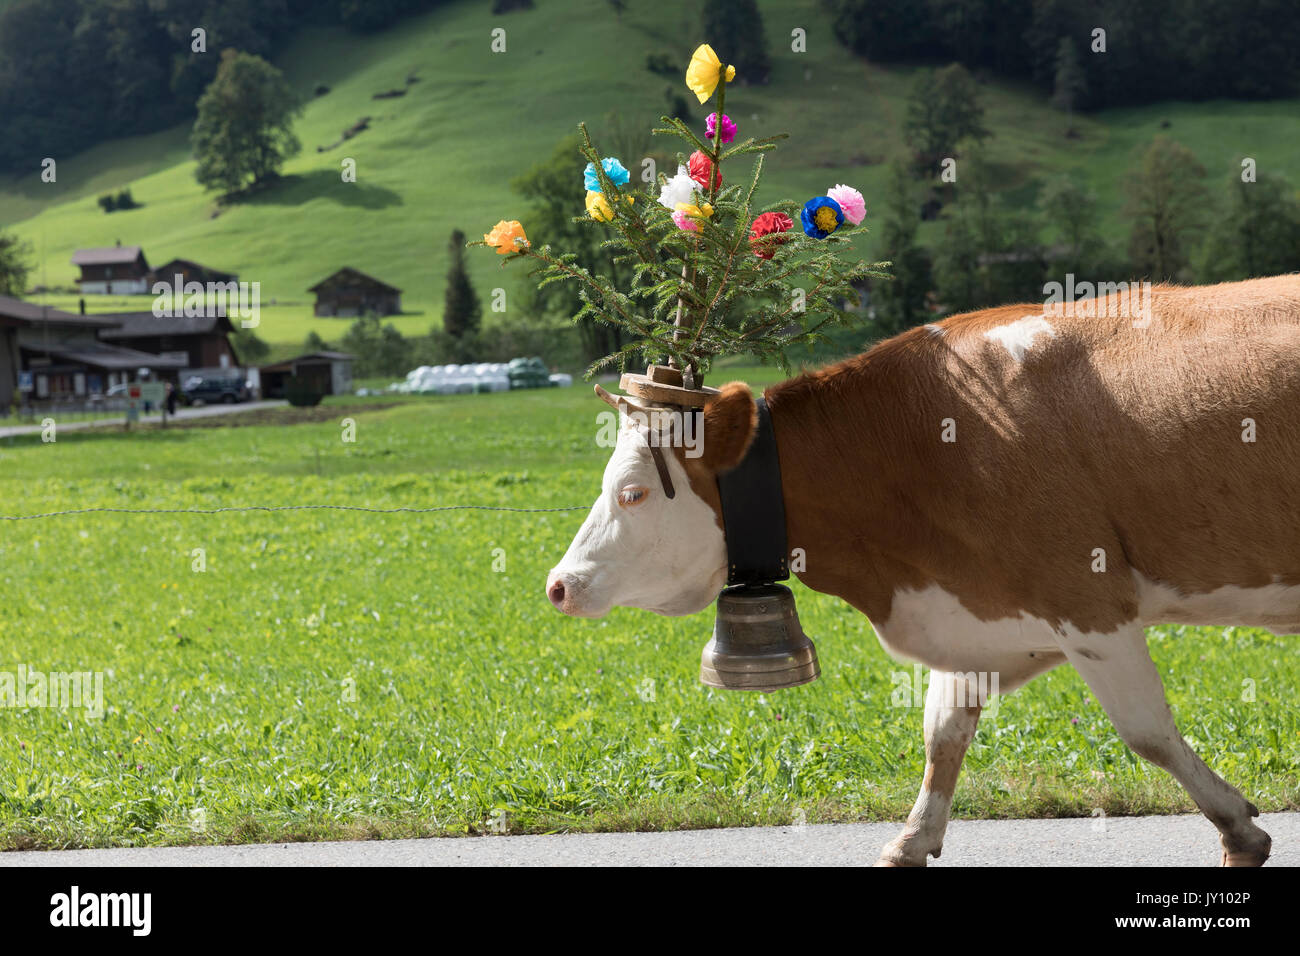 Cow walking on road wearing flowers and bell Stock Photo